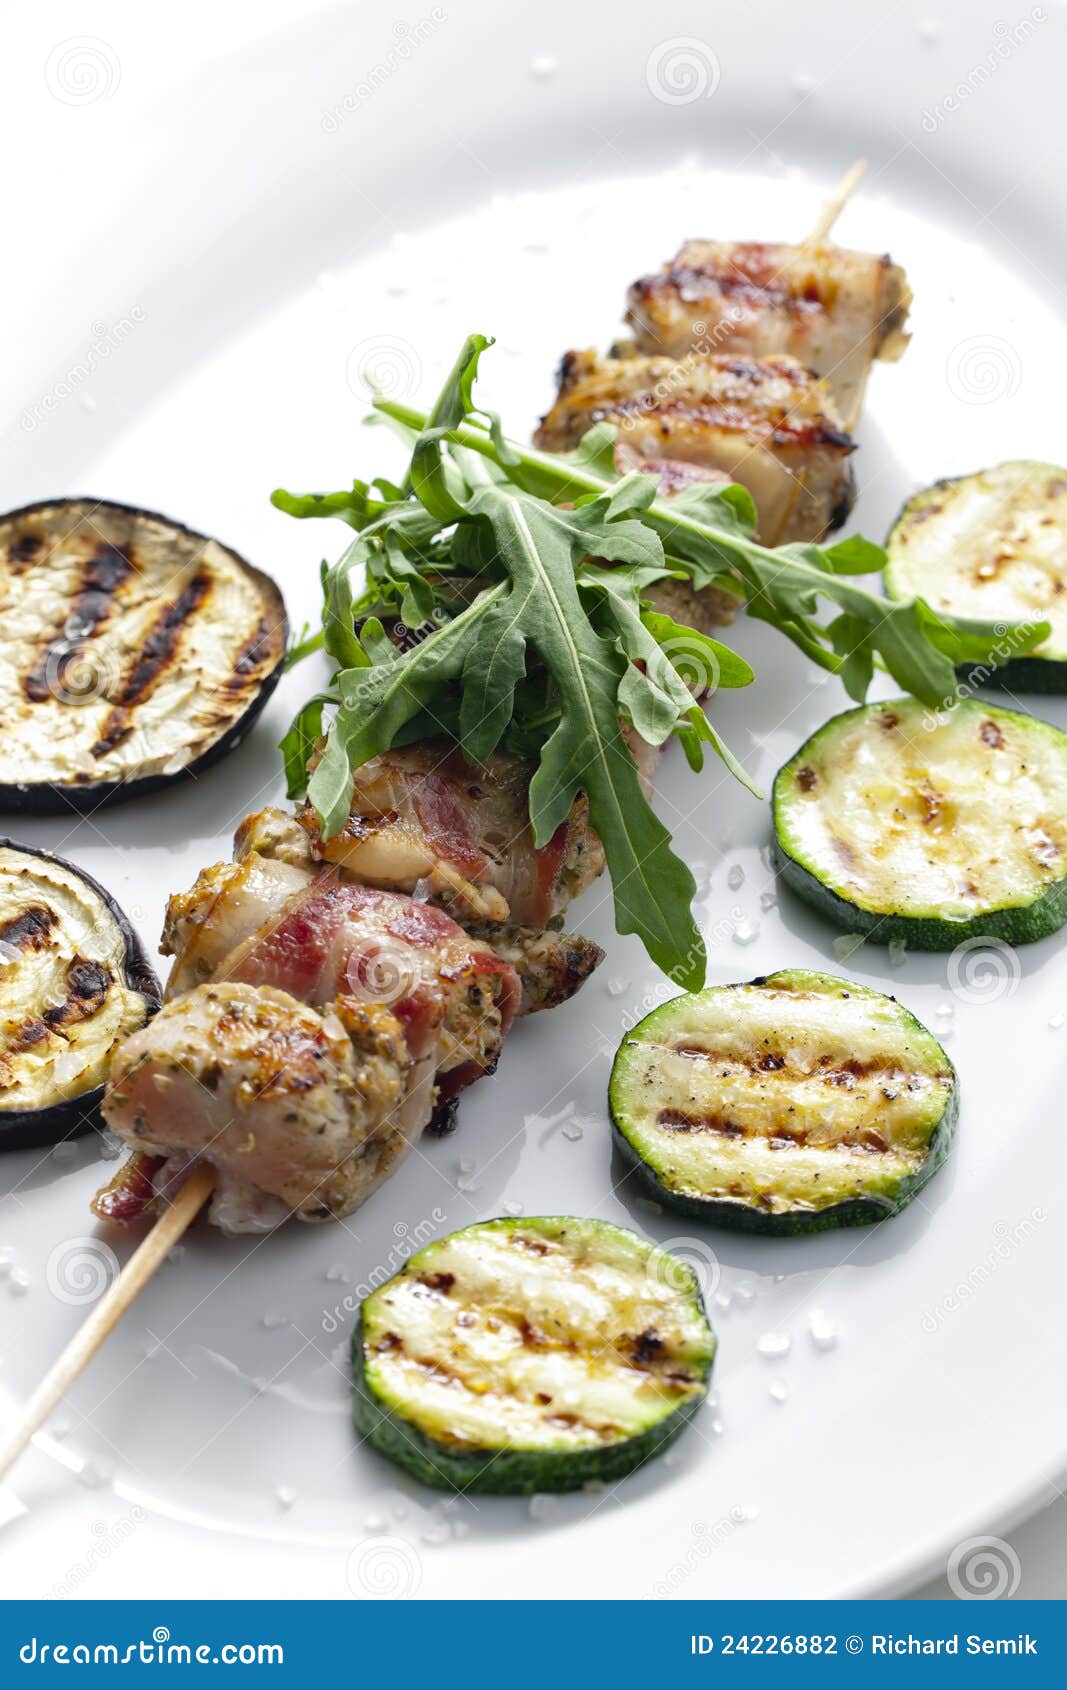 Turkey skewer stock photo. Image of cooked, cuisine, plate - 24226882